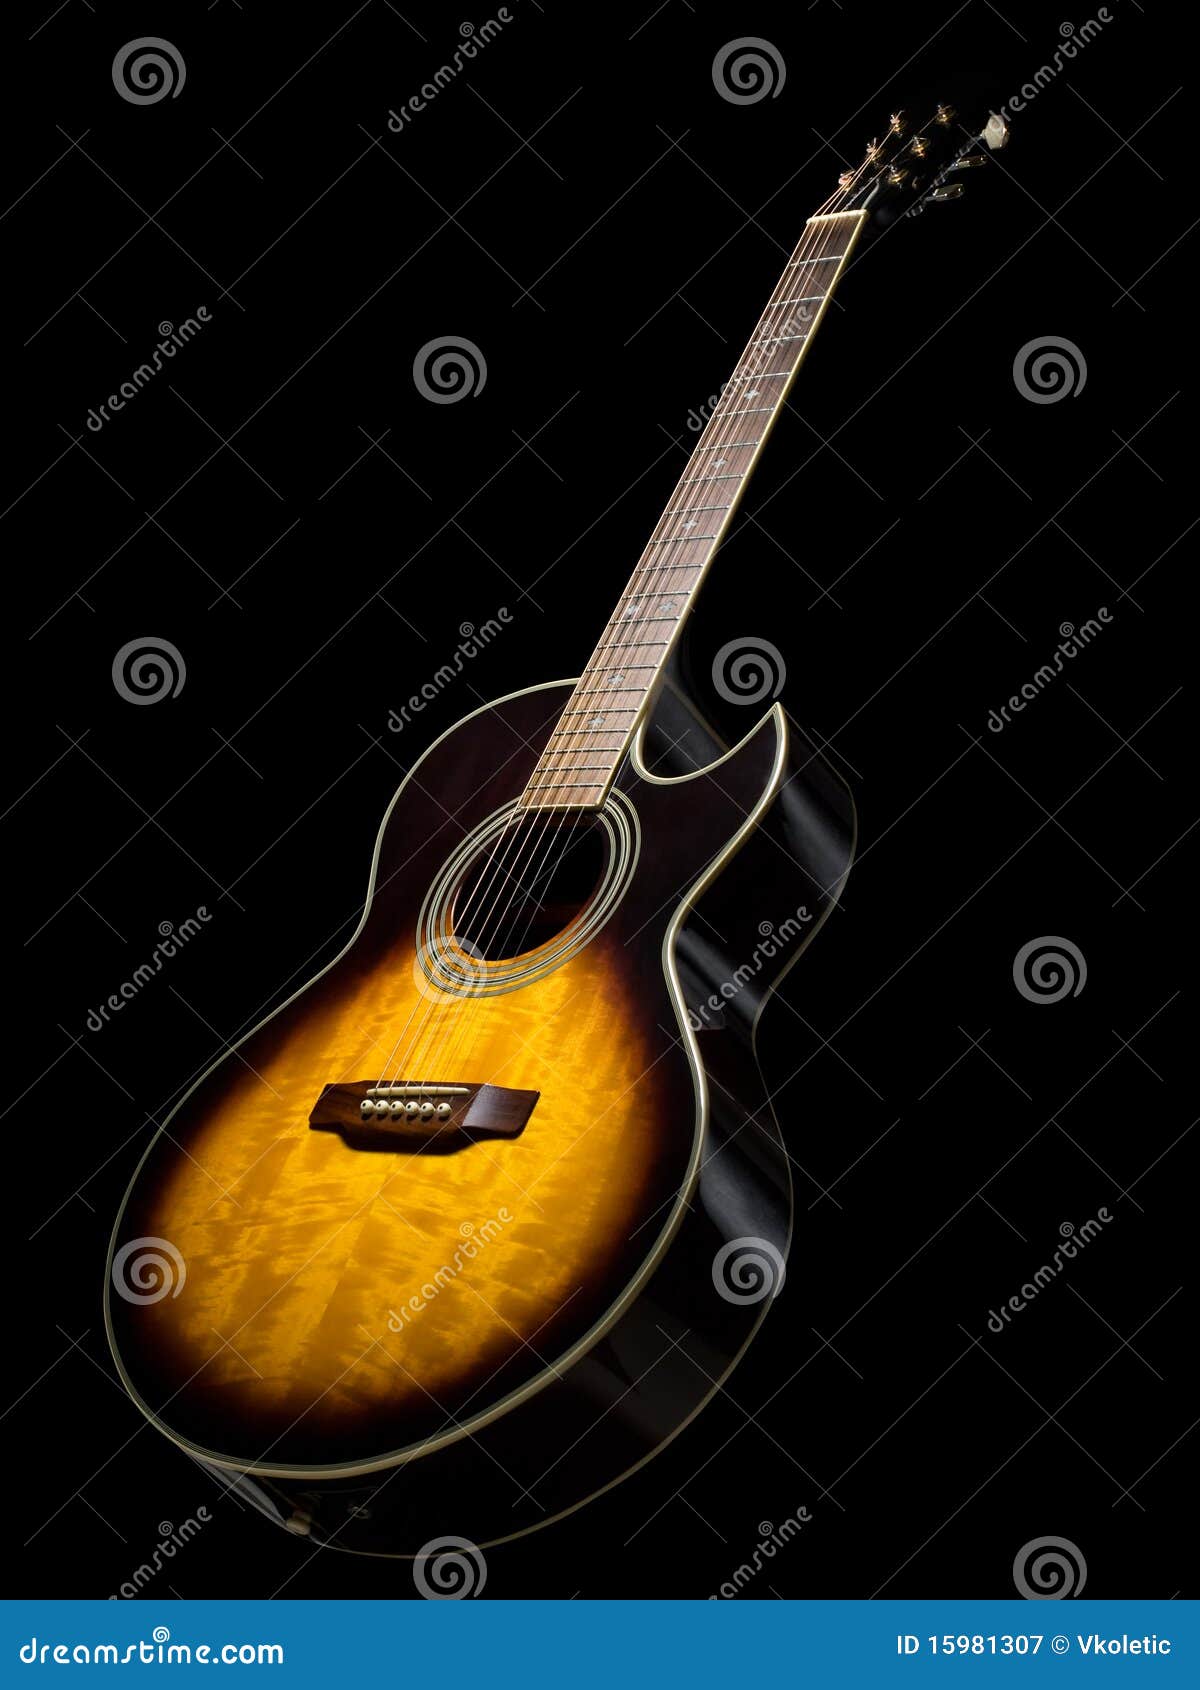 Acoustic Guitar Photography